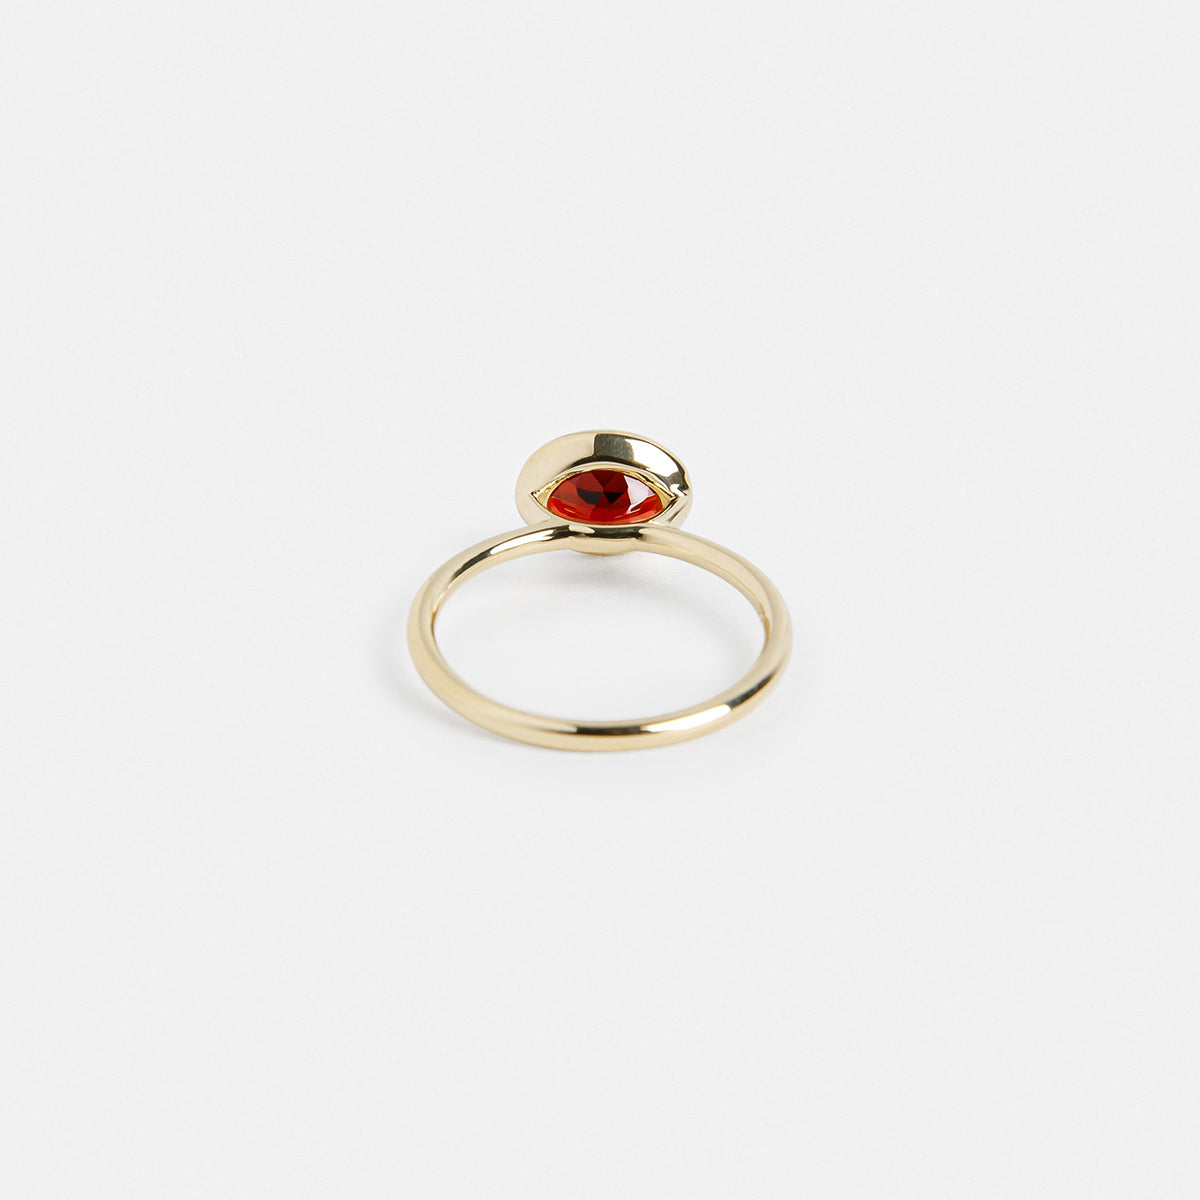 Lida Delicate Ring in 14k Gold set with an oval cut garnet By SHW Fine Jewelry NYC